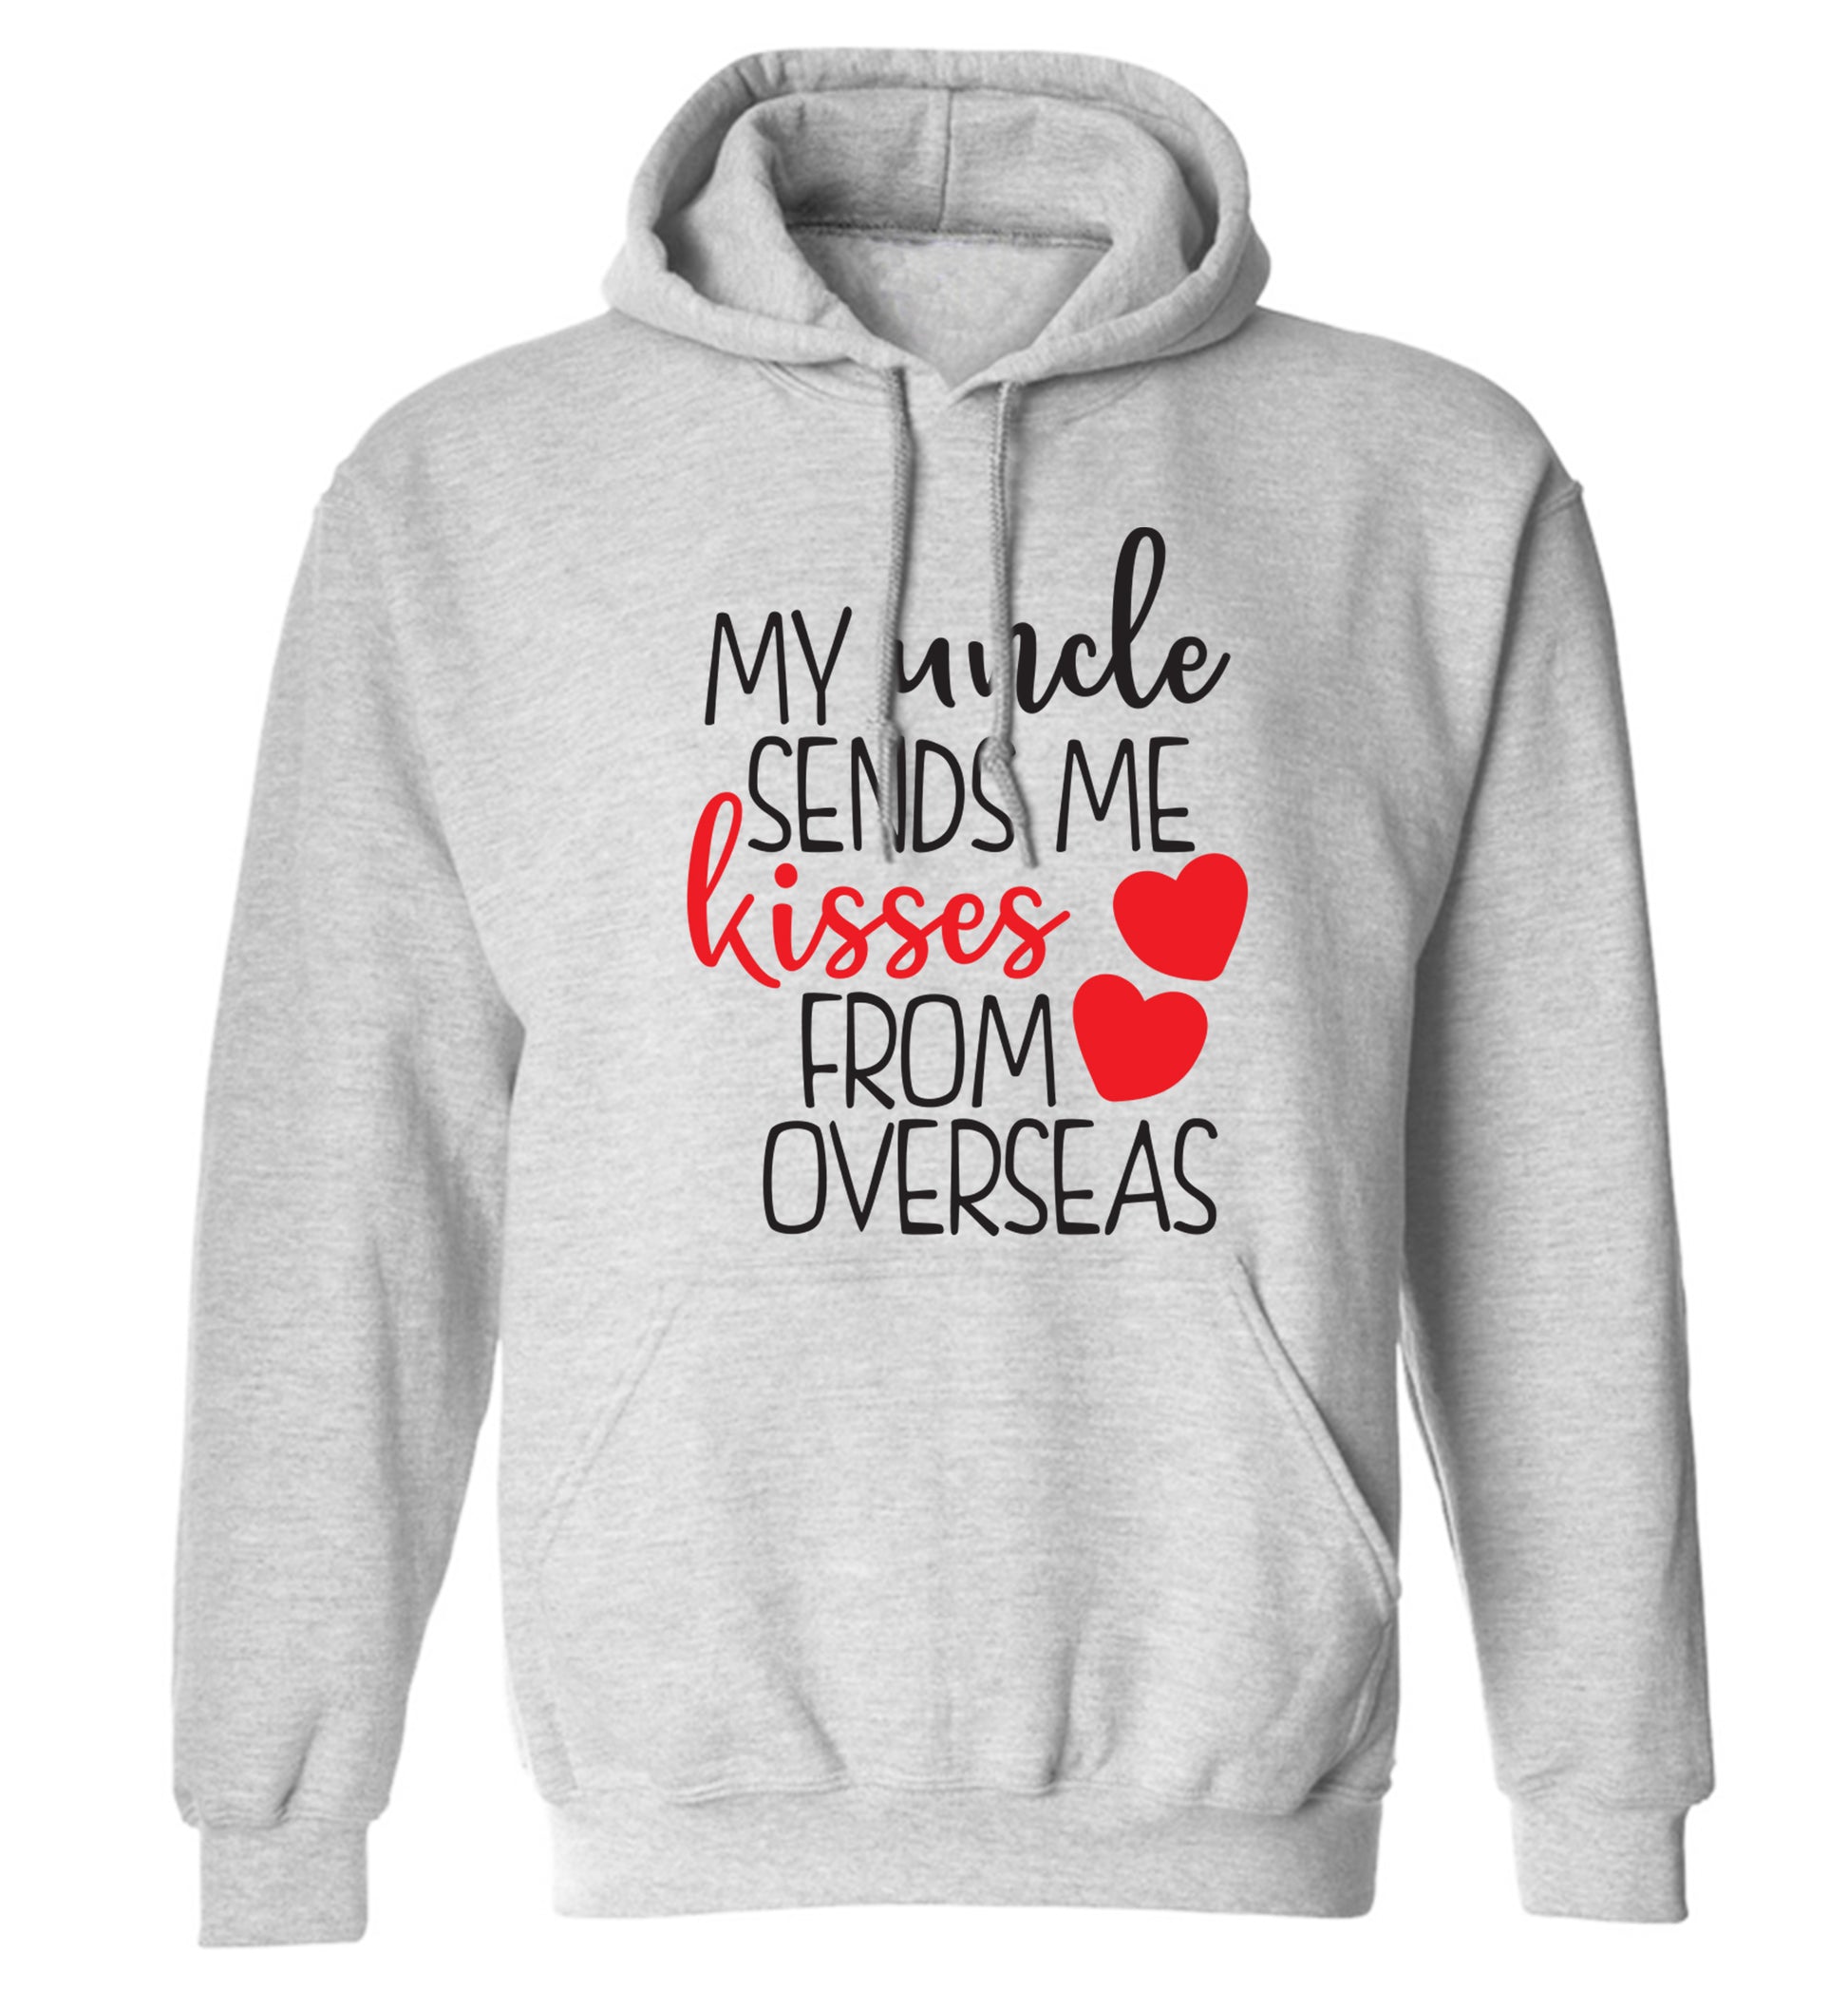 My uncle sends me kisses from overseas adults unisex grey hoodie 2XL